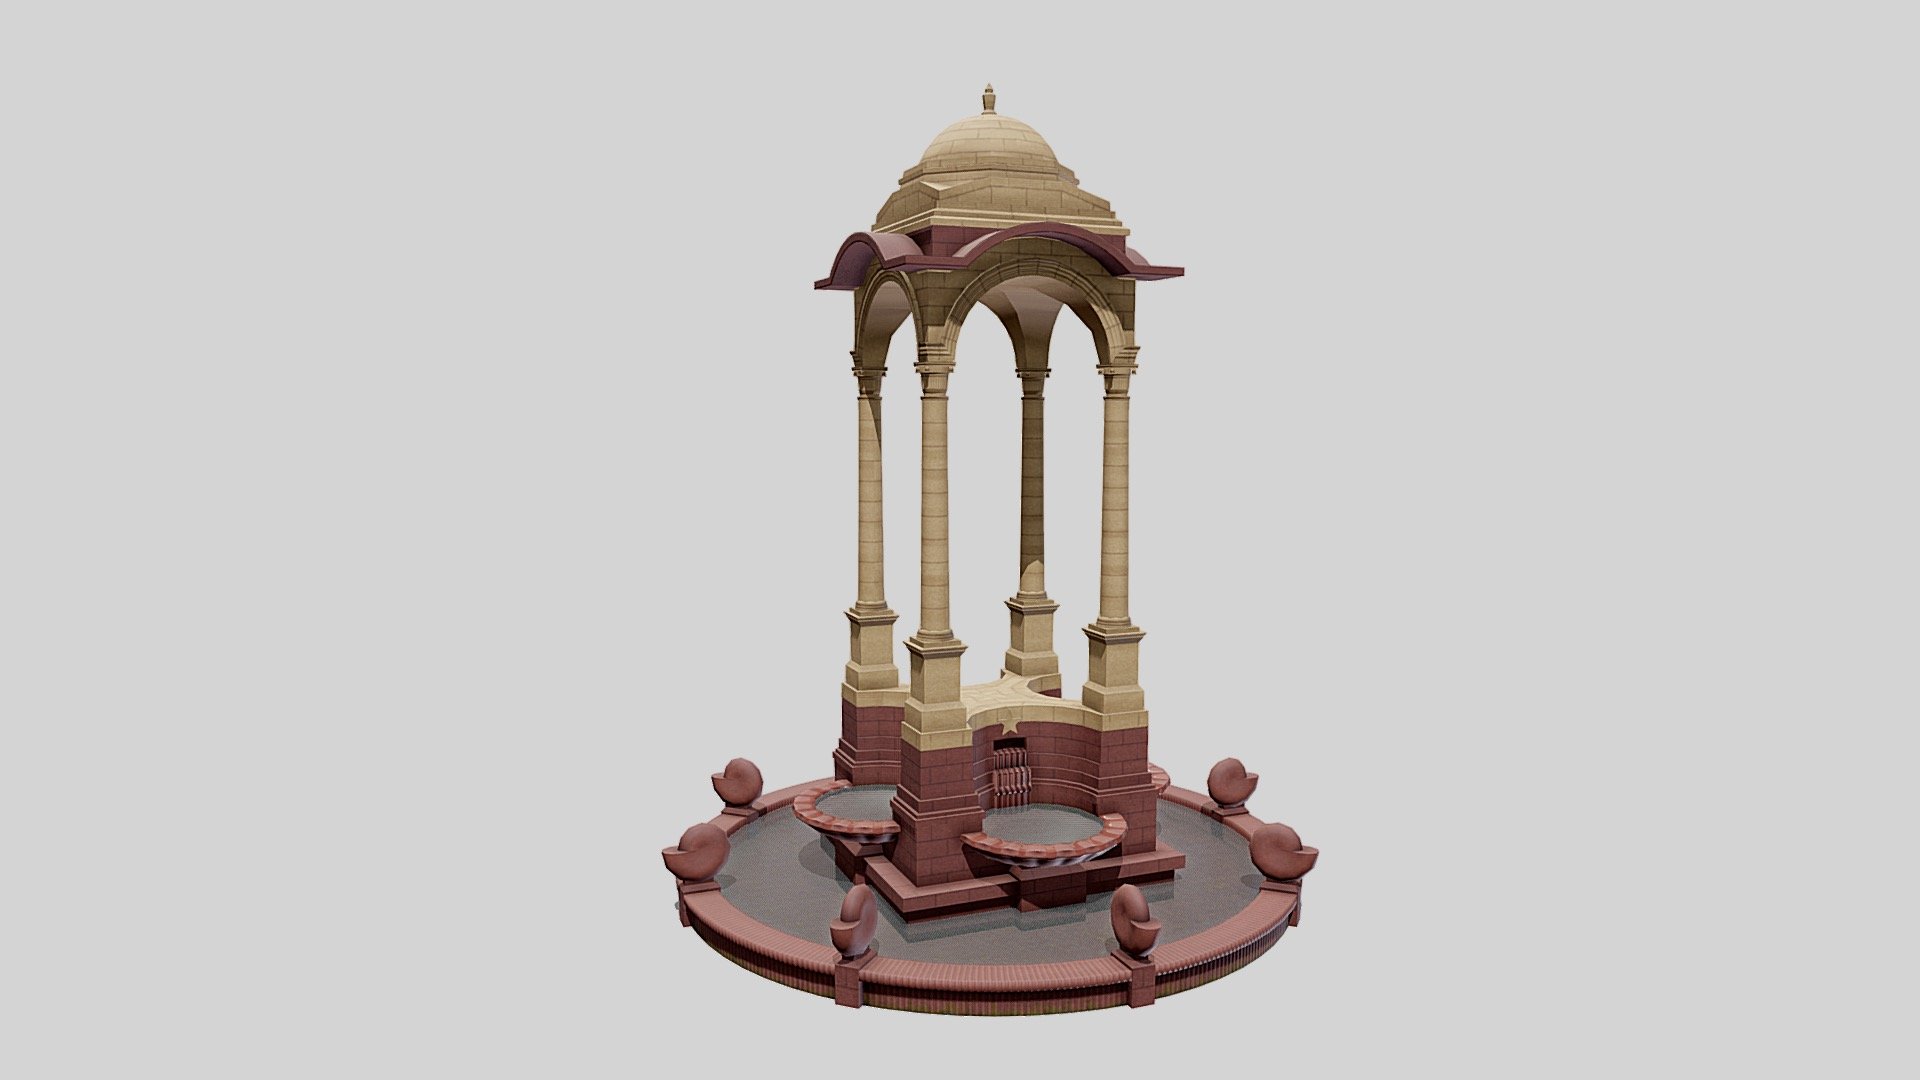 About 150 metres East of the India Gate in New Delhi, India is a 22m cupola, inspired by a sixth-century pavilion from Mahabalipuram, with four Delhi Order columns to support the domed canopy and its chhajja.

The textures have been created in Substance Painter and Designer specifcally for this model to give it a high quality, realistic look 3d model